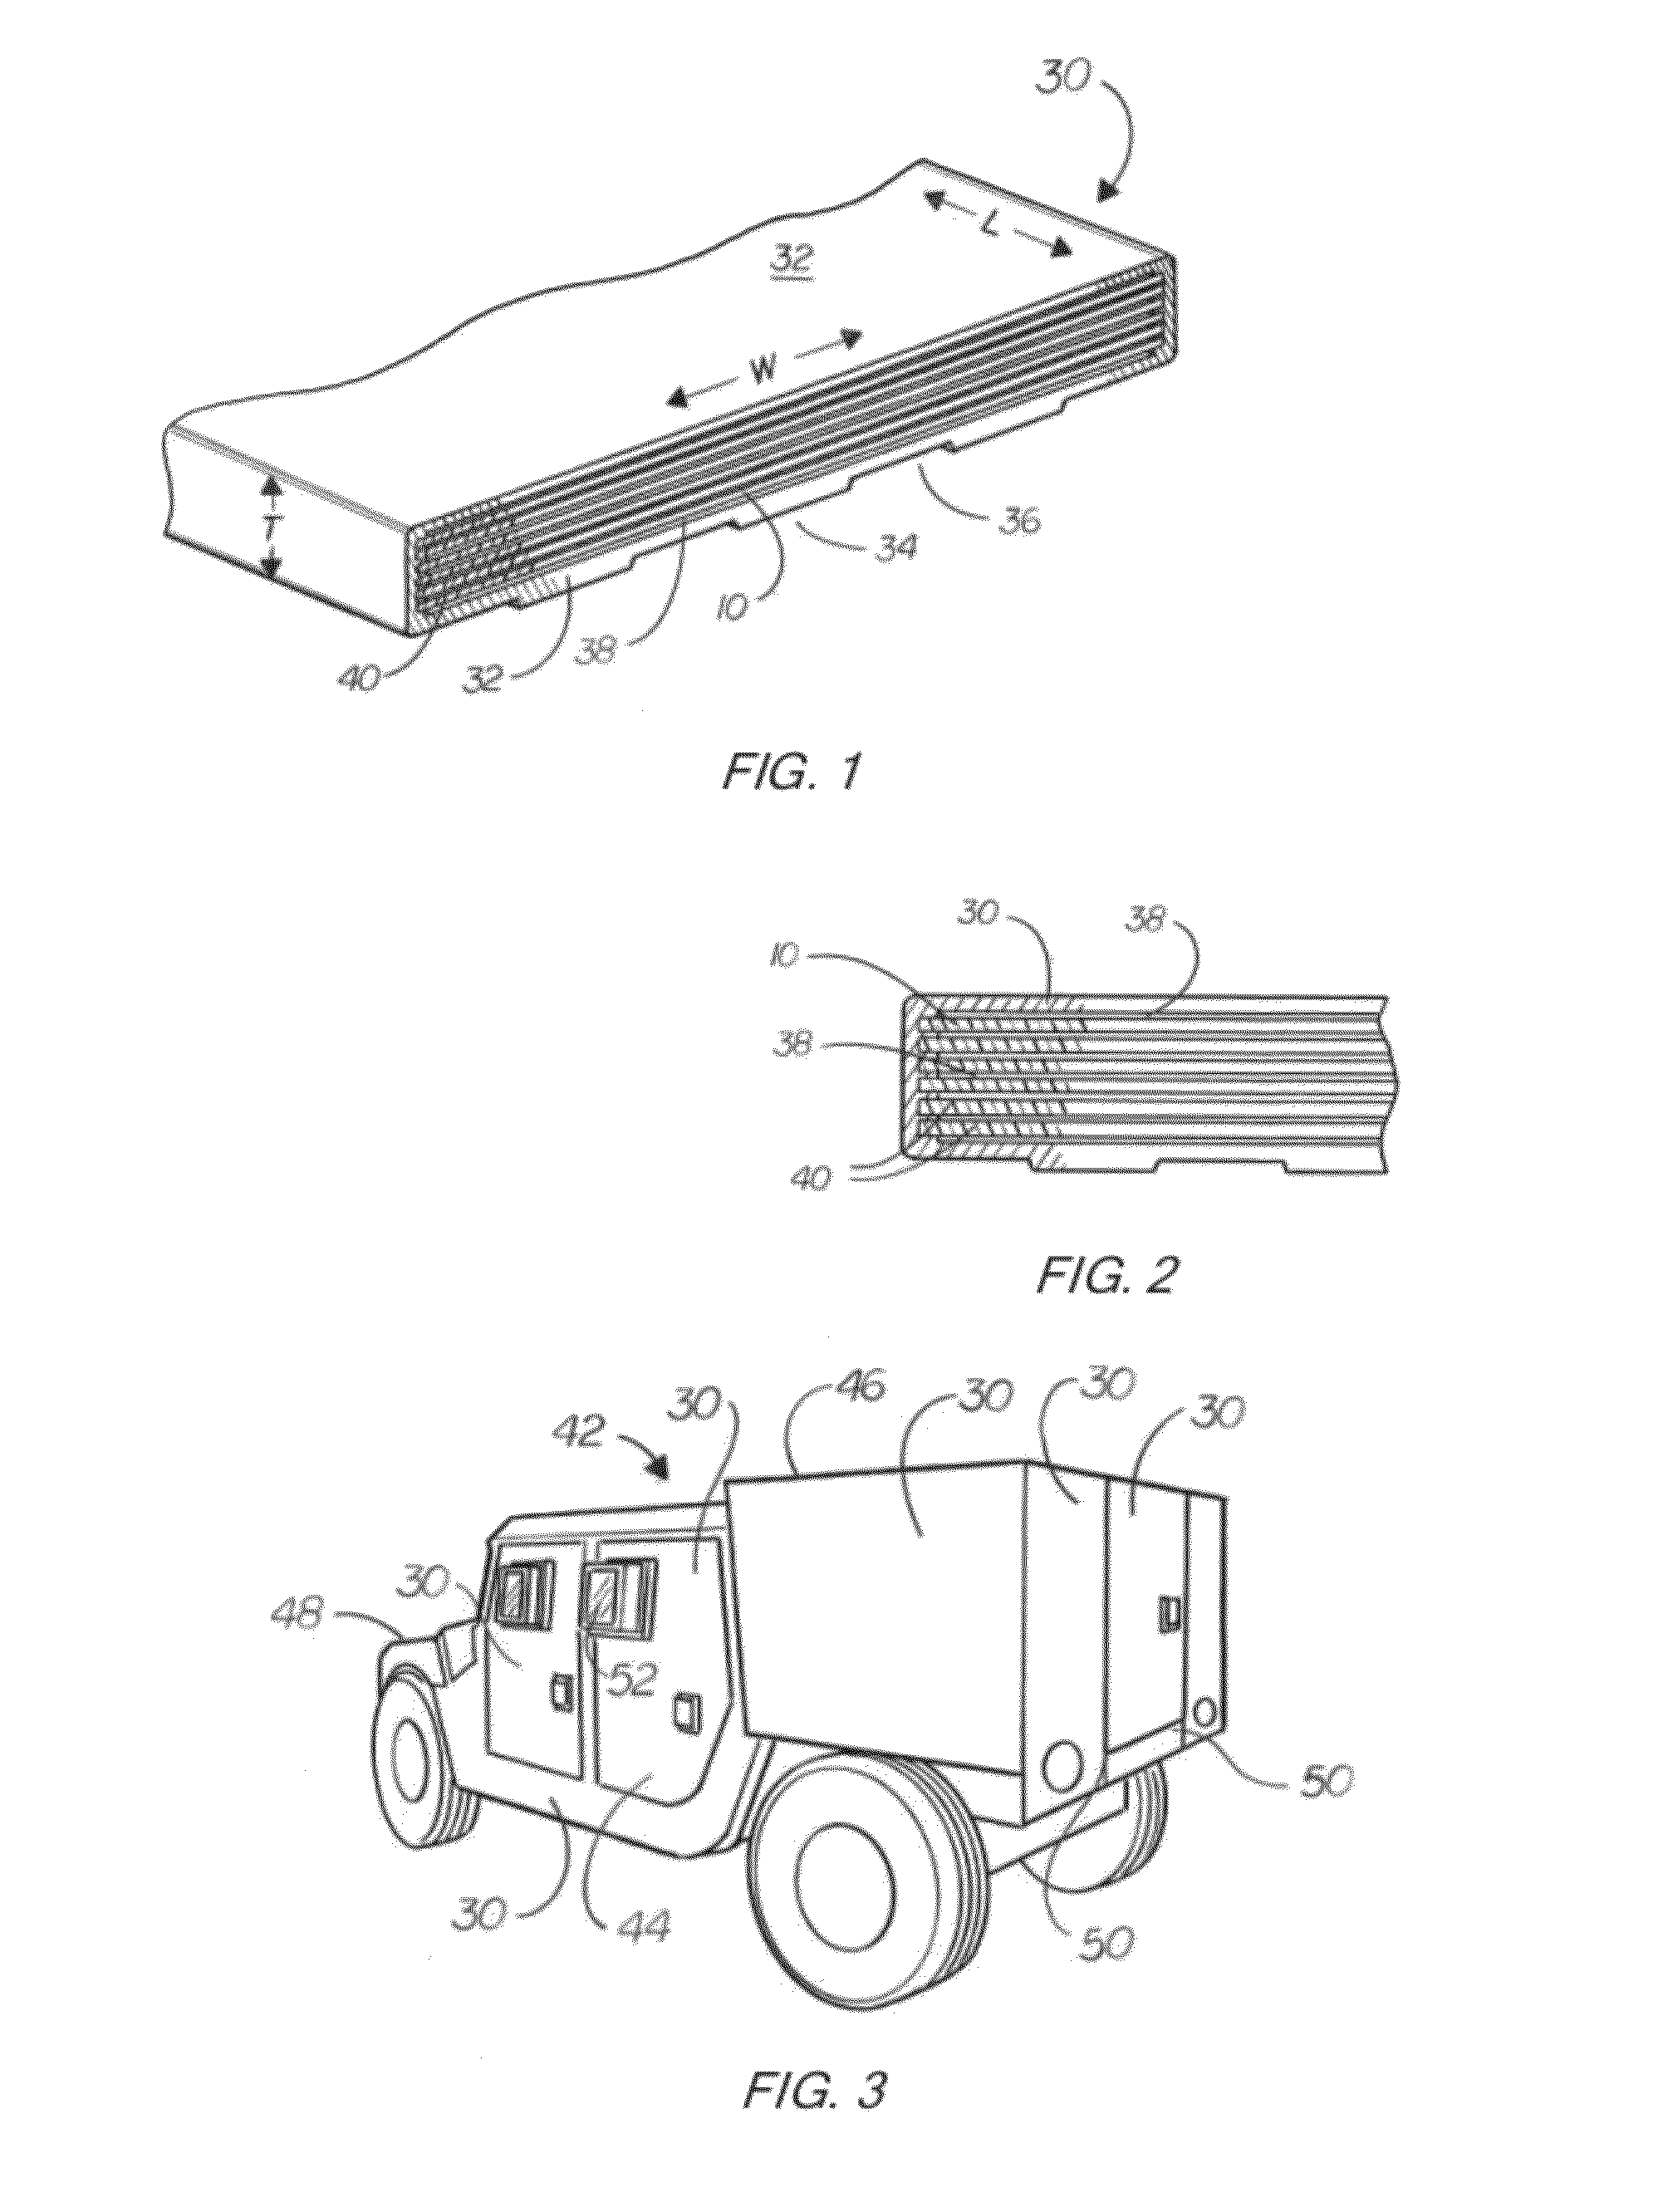 Non-metallic armor article and method of manufacture